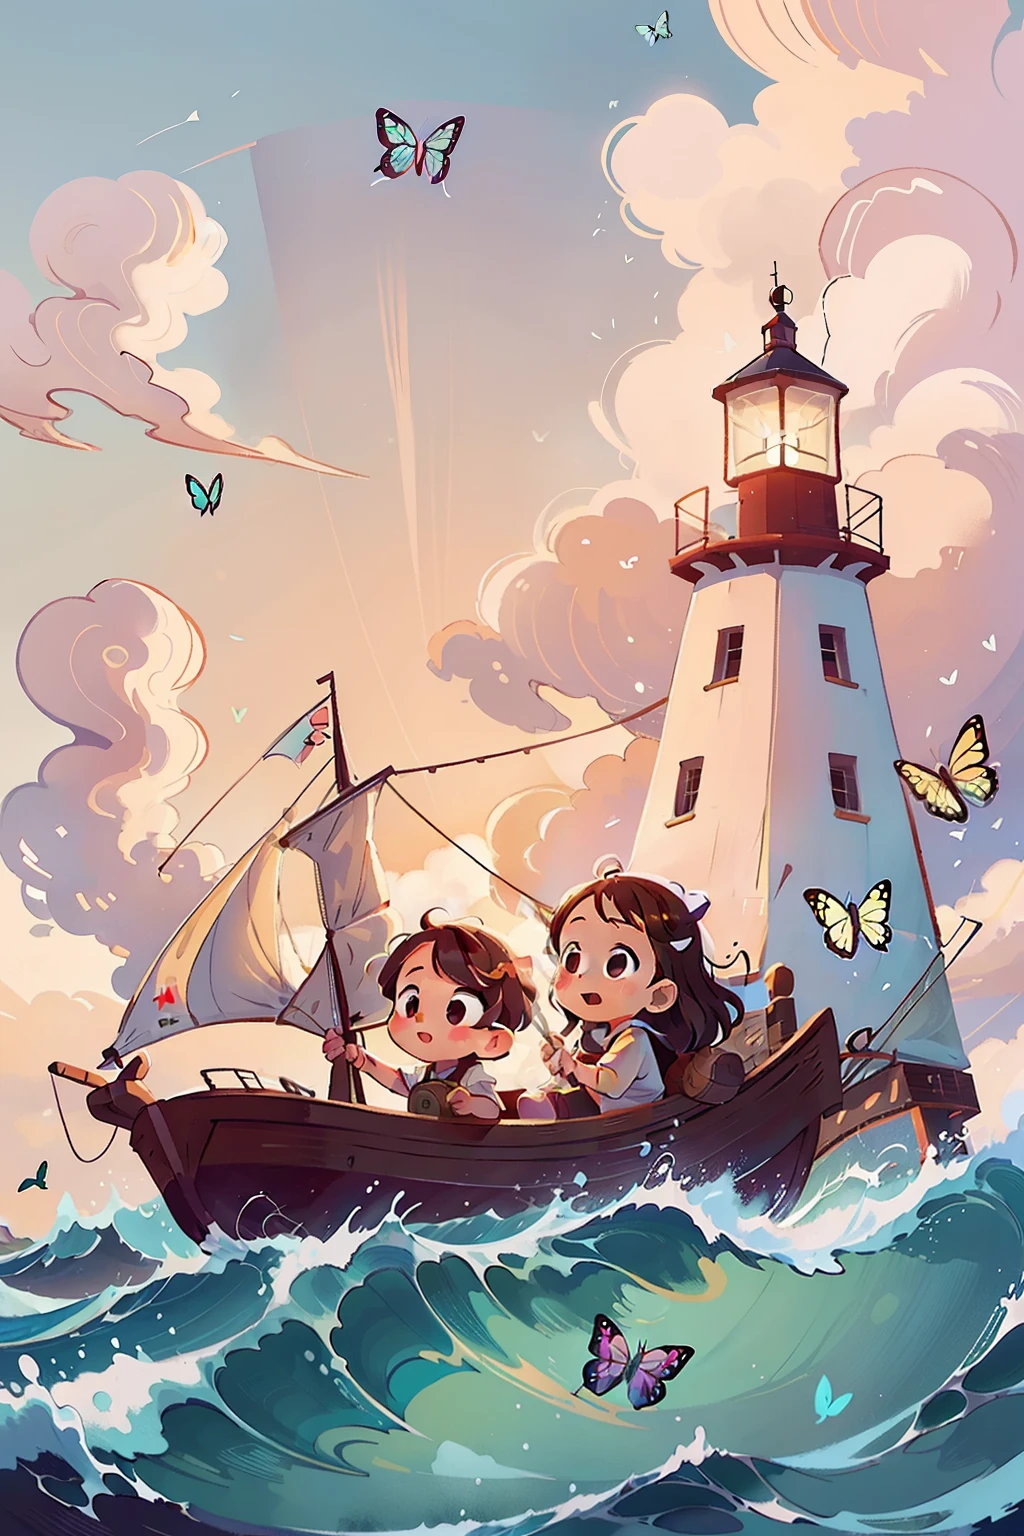 Generates an image of two very young girls sailing on a boat, waves, sea, sky with white clouds. colorful butterflies, lighthouse in the background,